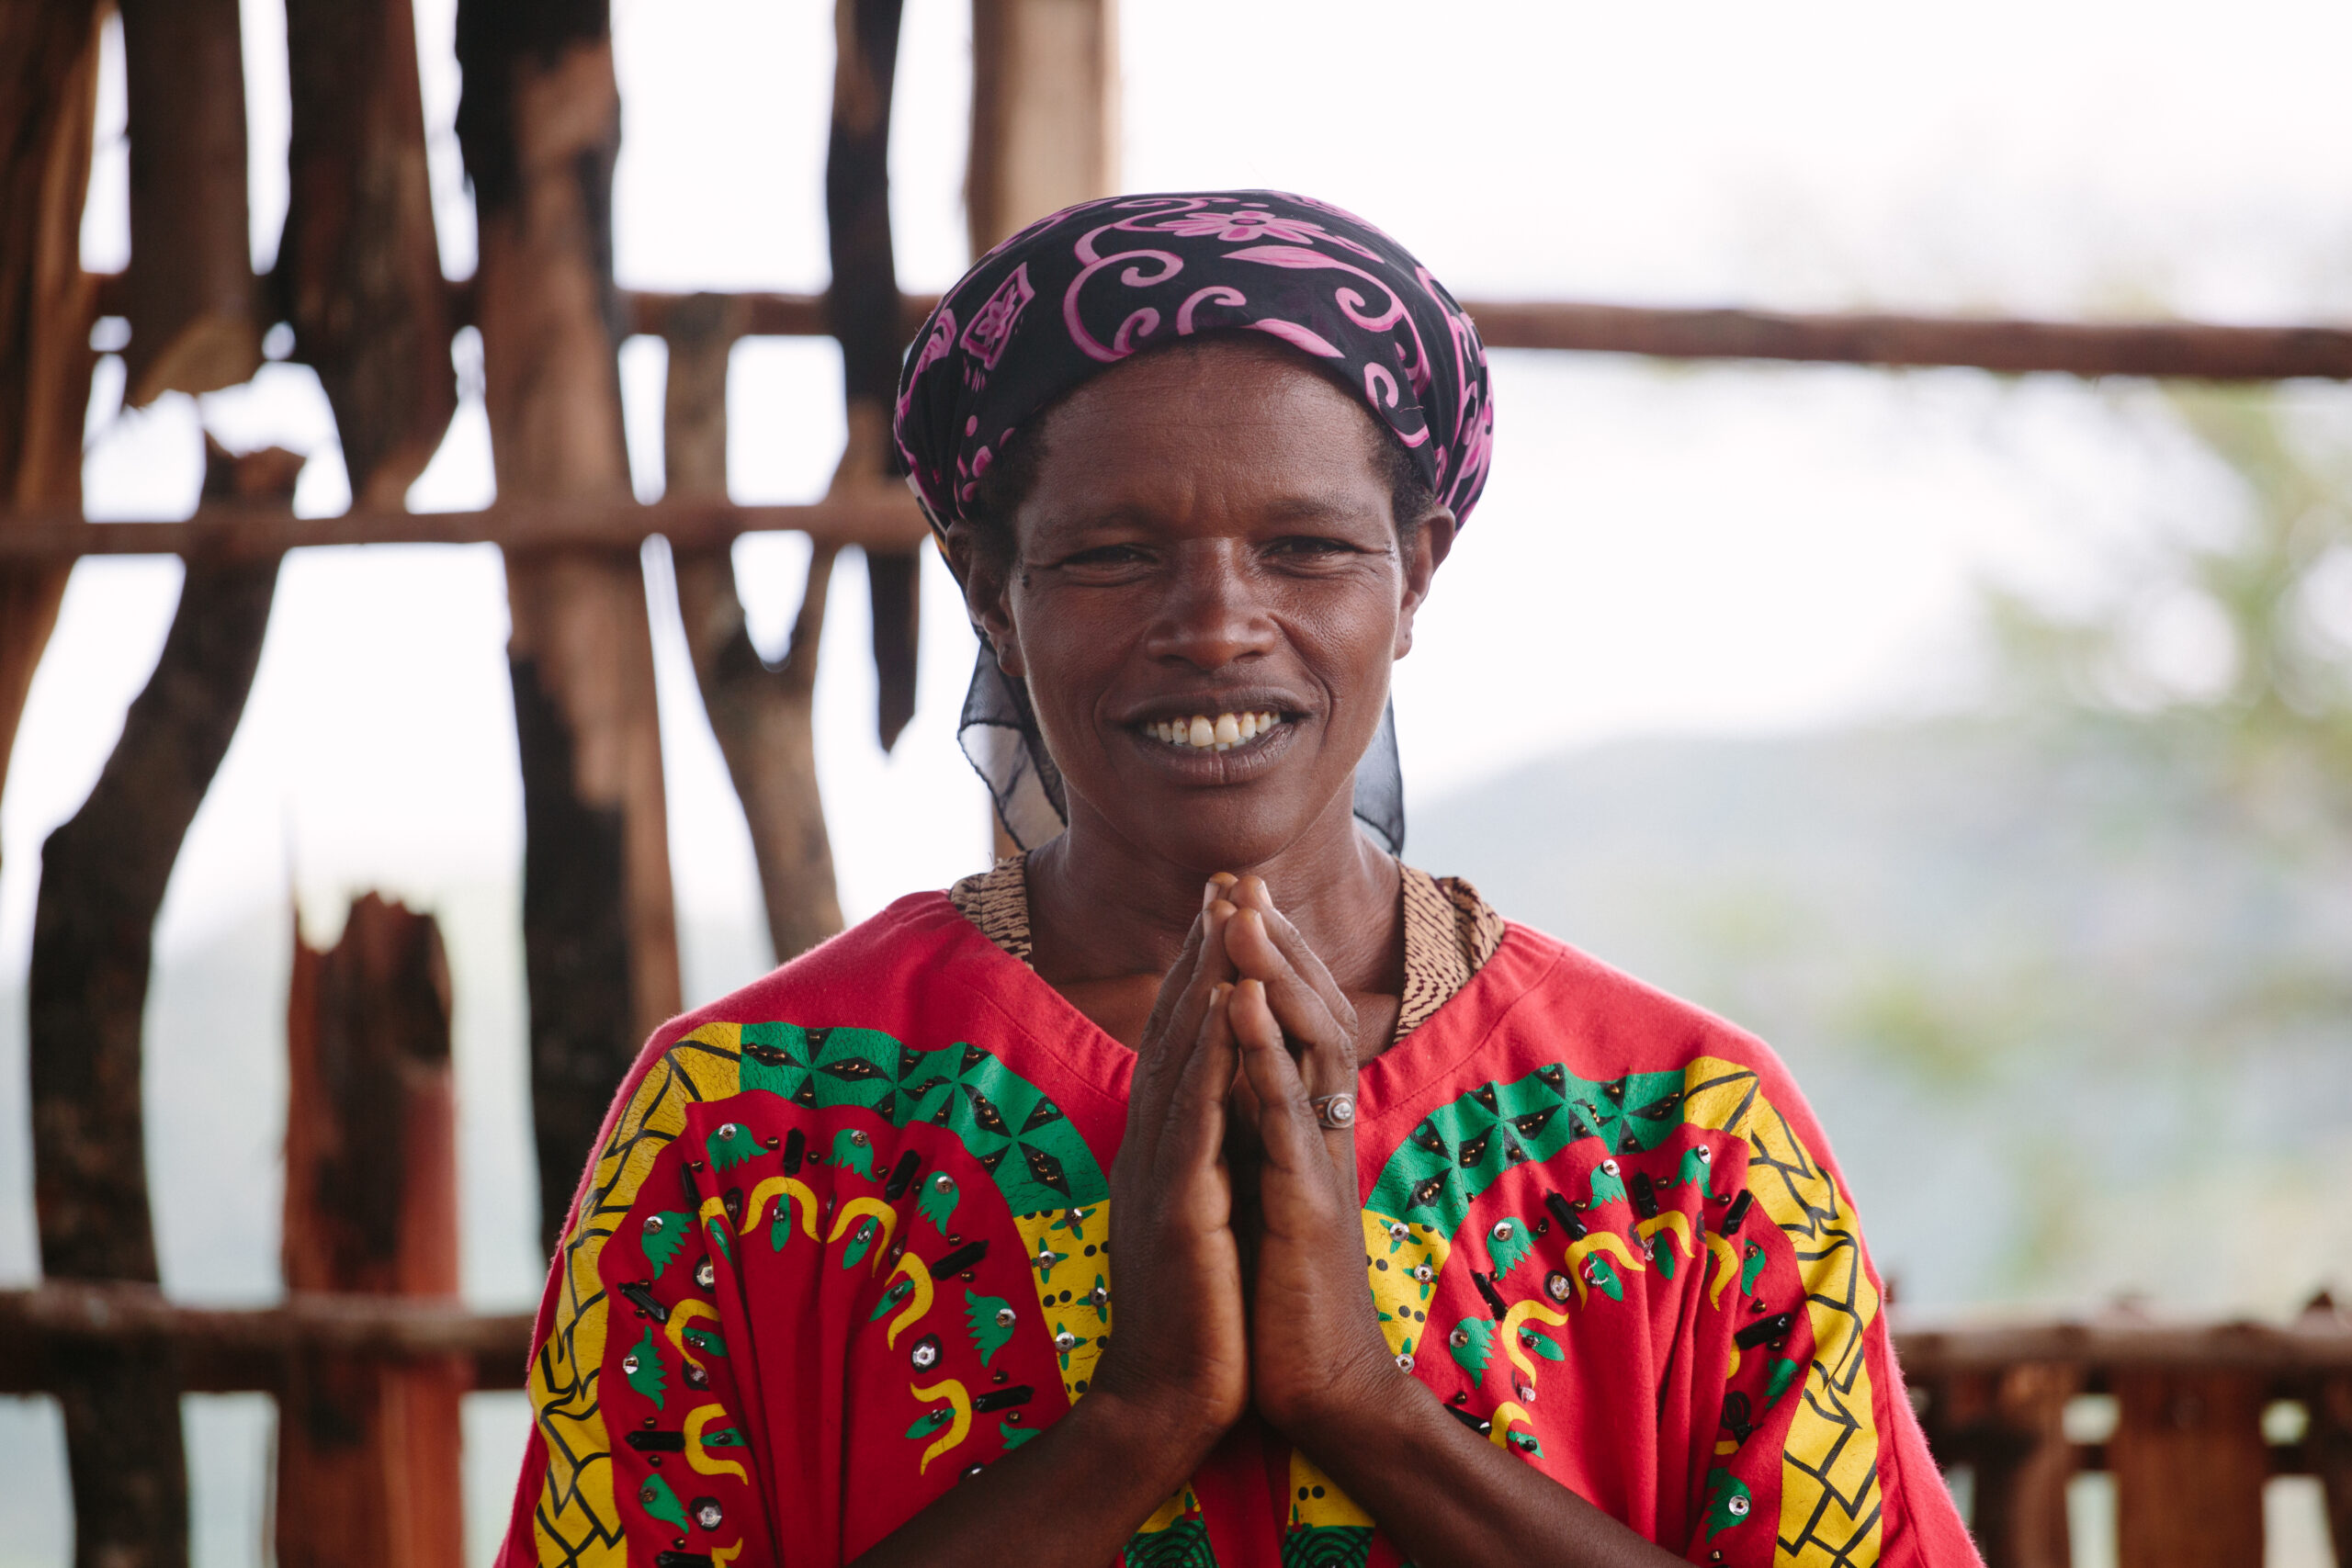 Ethiopian woman in traditional dress lifts hands in prayer